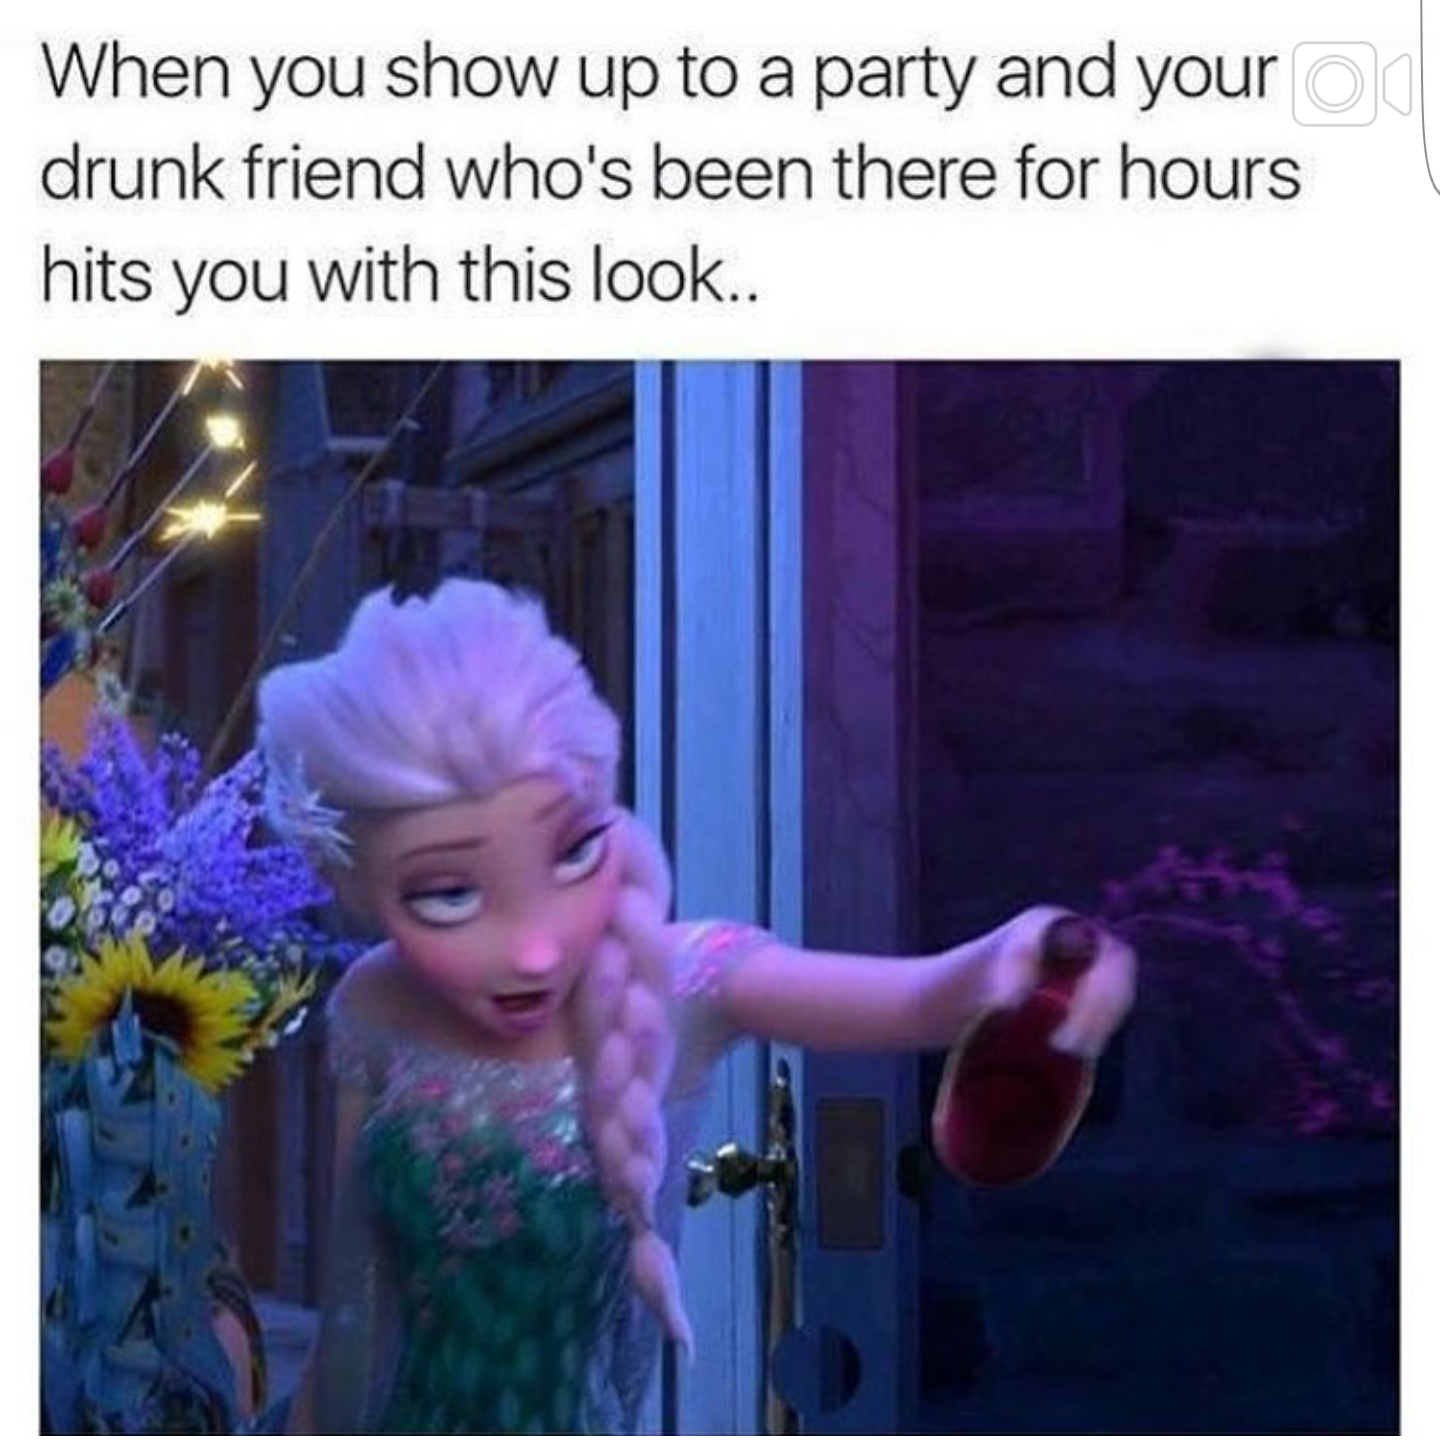 Drunk Elsa meme about walking into a party and your friend has been there for hours and is  all like this.